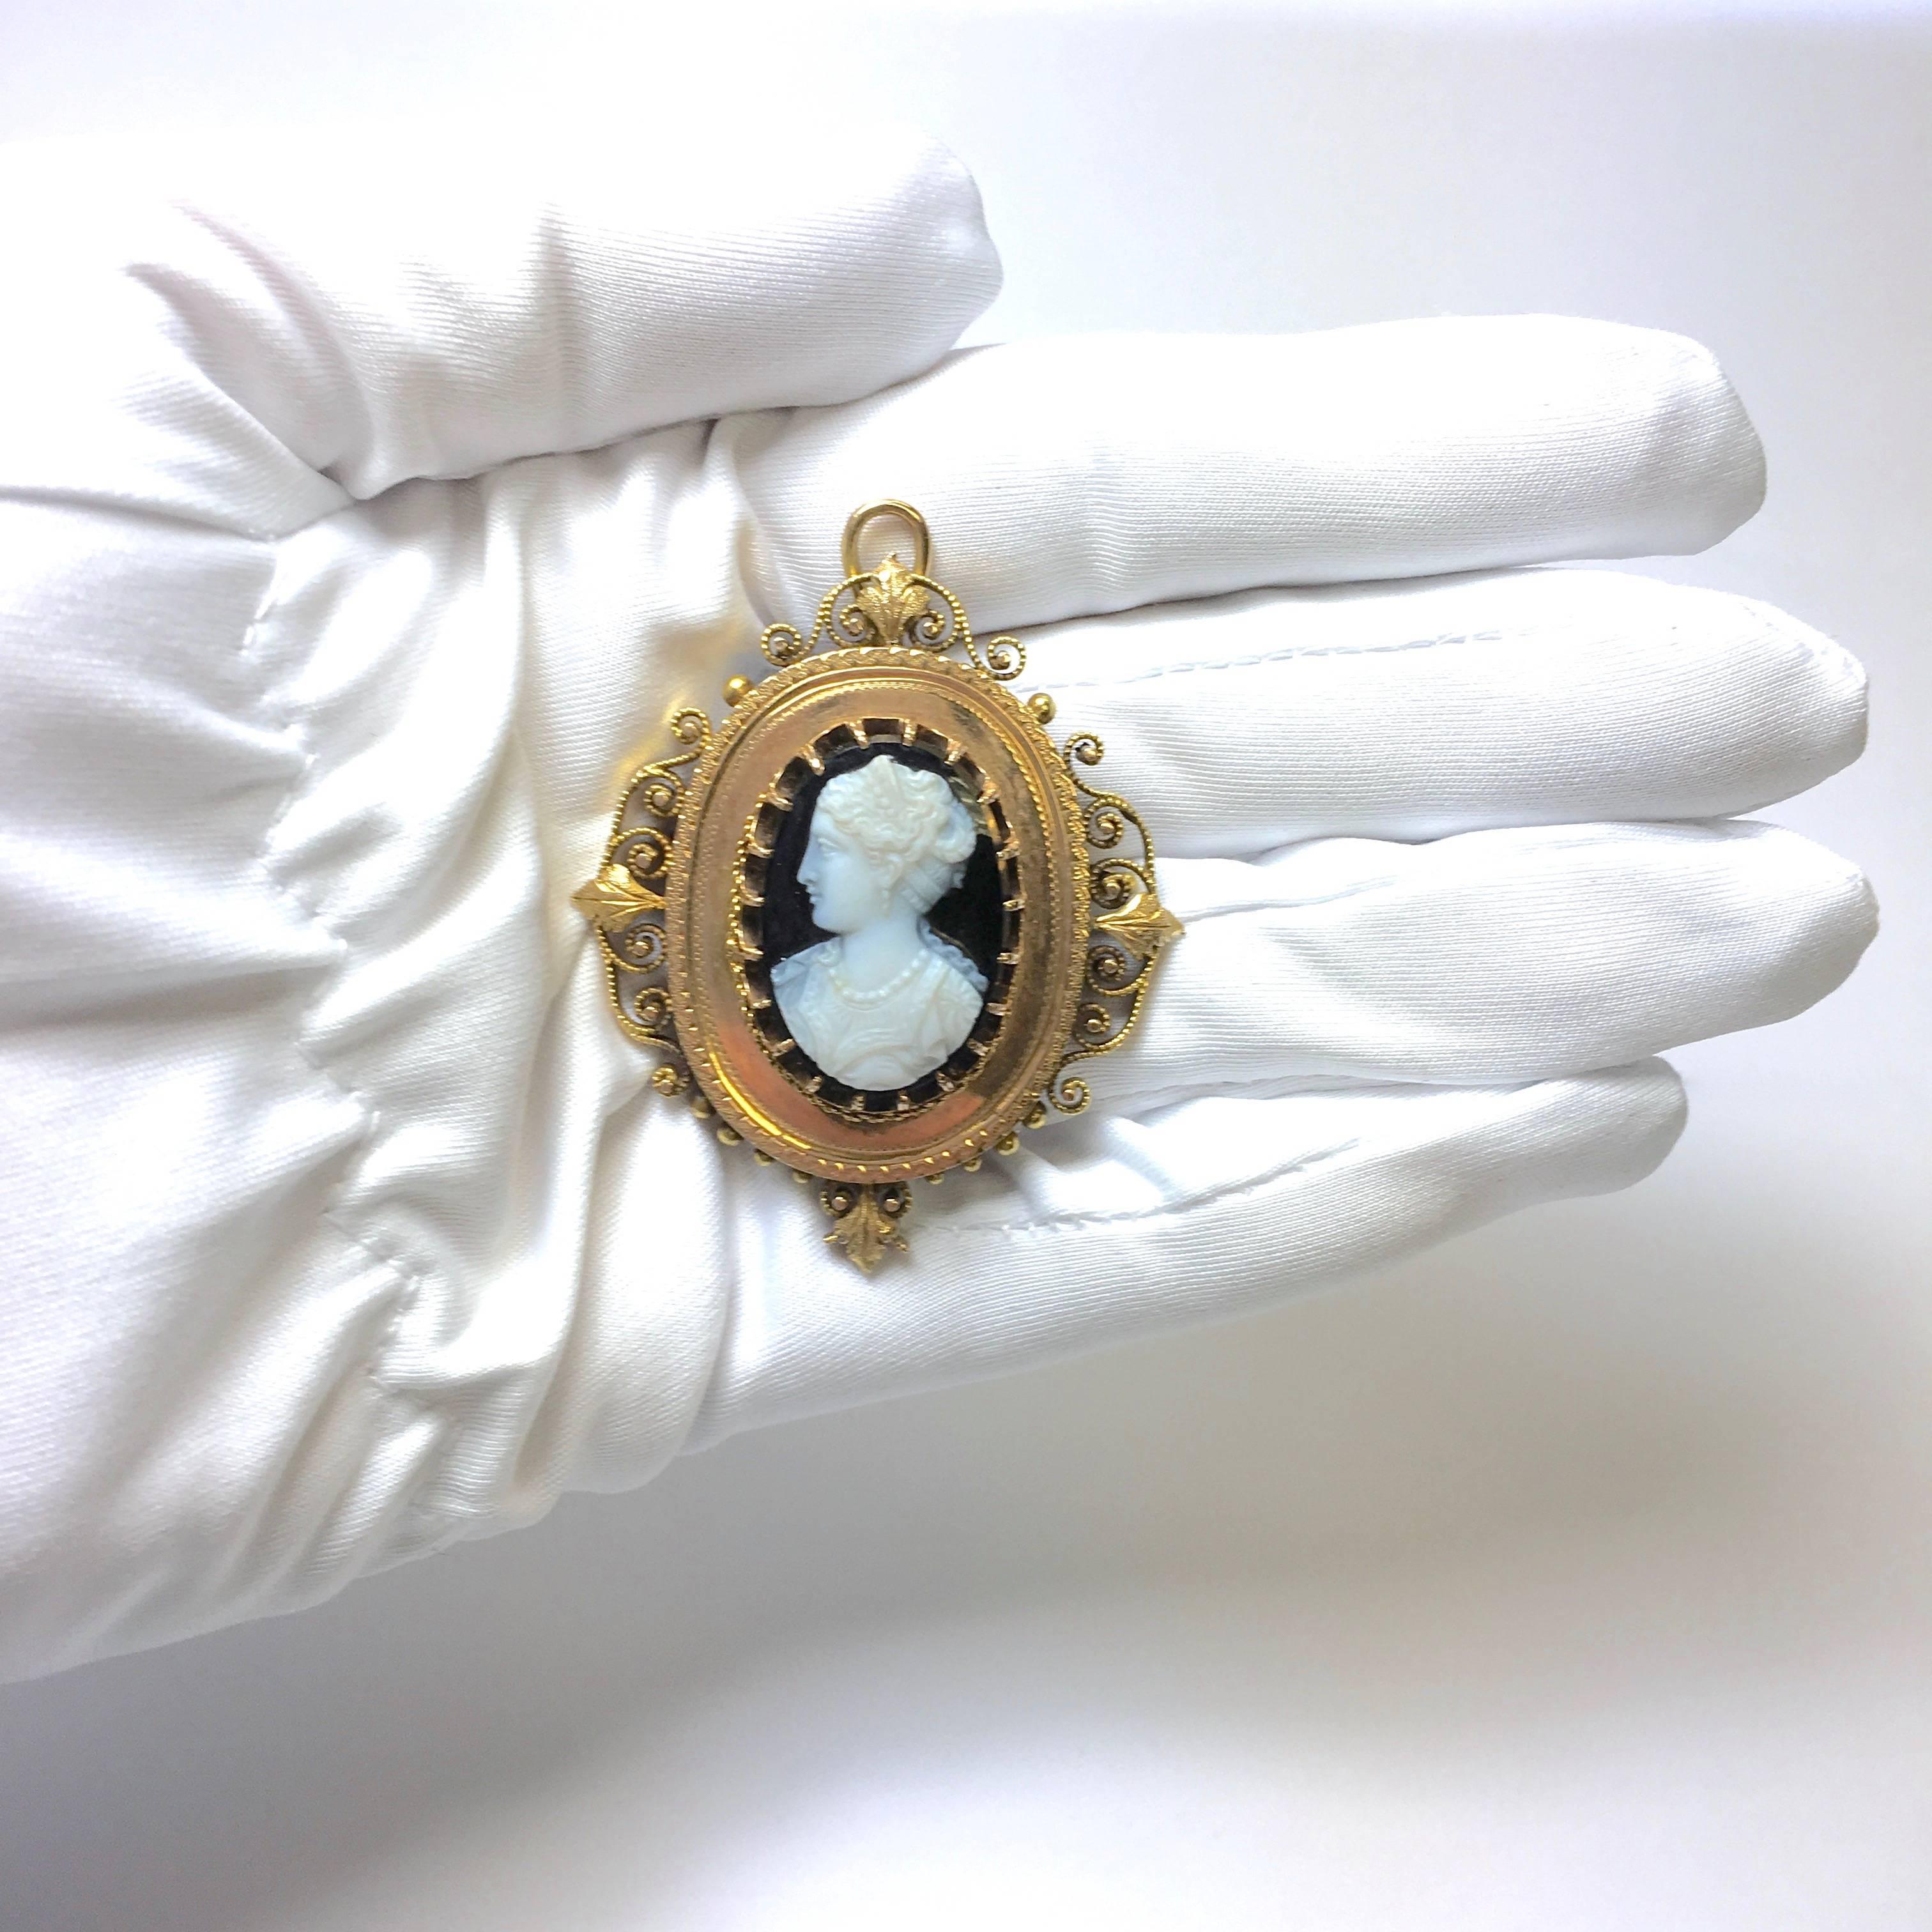 Victorian Onyx Cameo Gold Pendant Brooch and Earrings Ensemble In Excellent Condition For Sale In Agoura Hills, CA